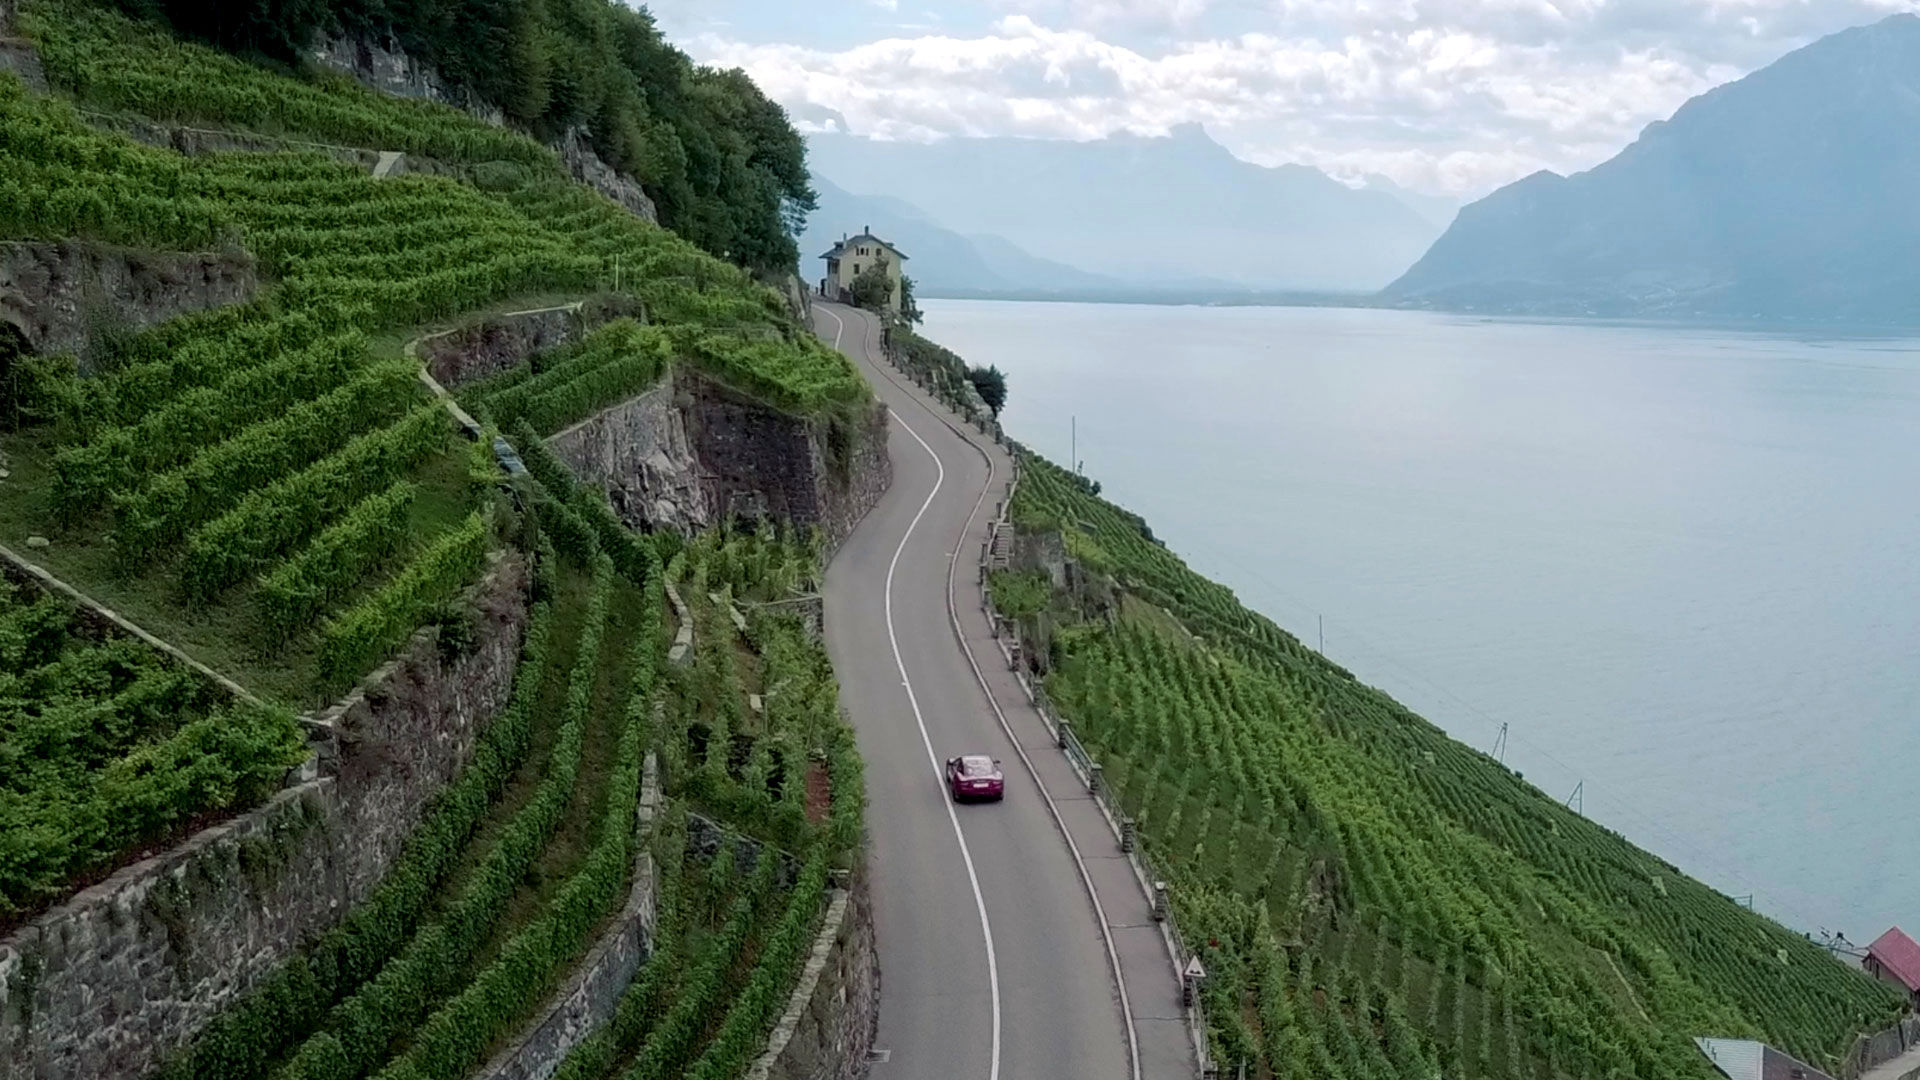 Maserati riding on a road near a lake with vineyards